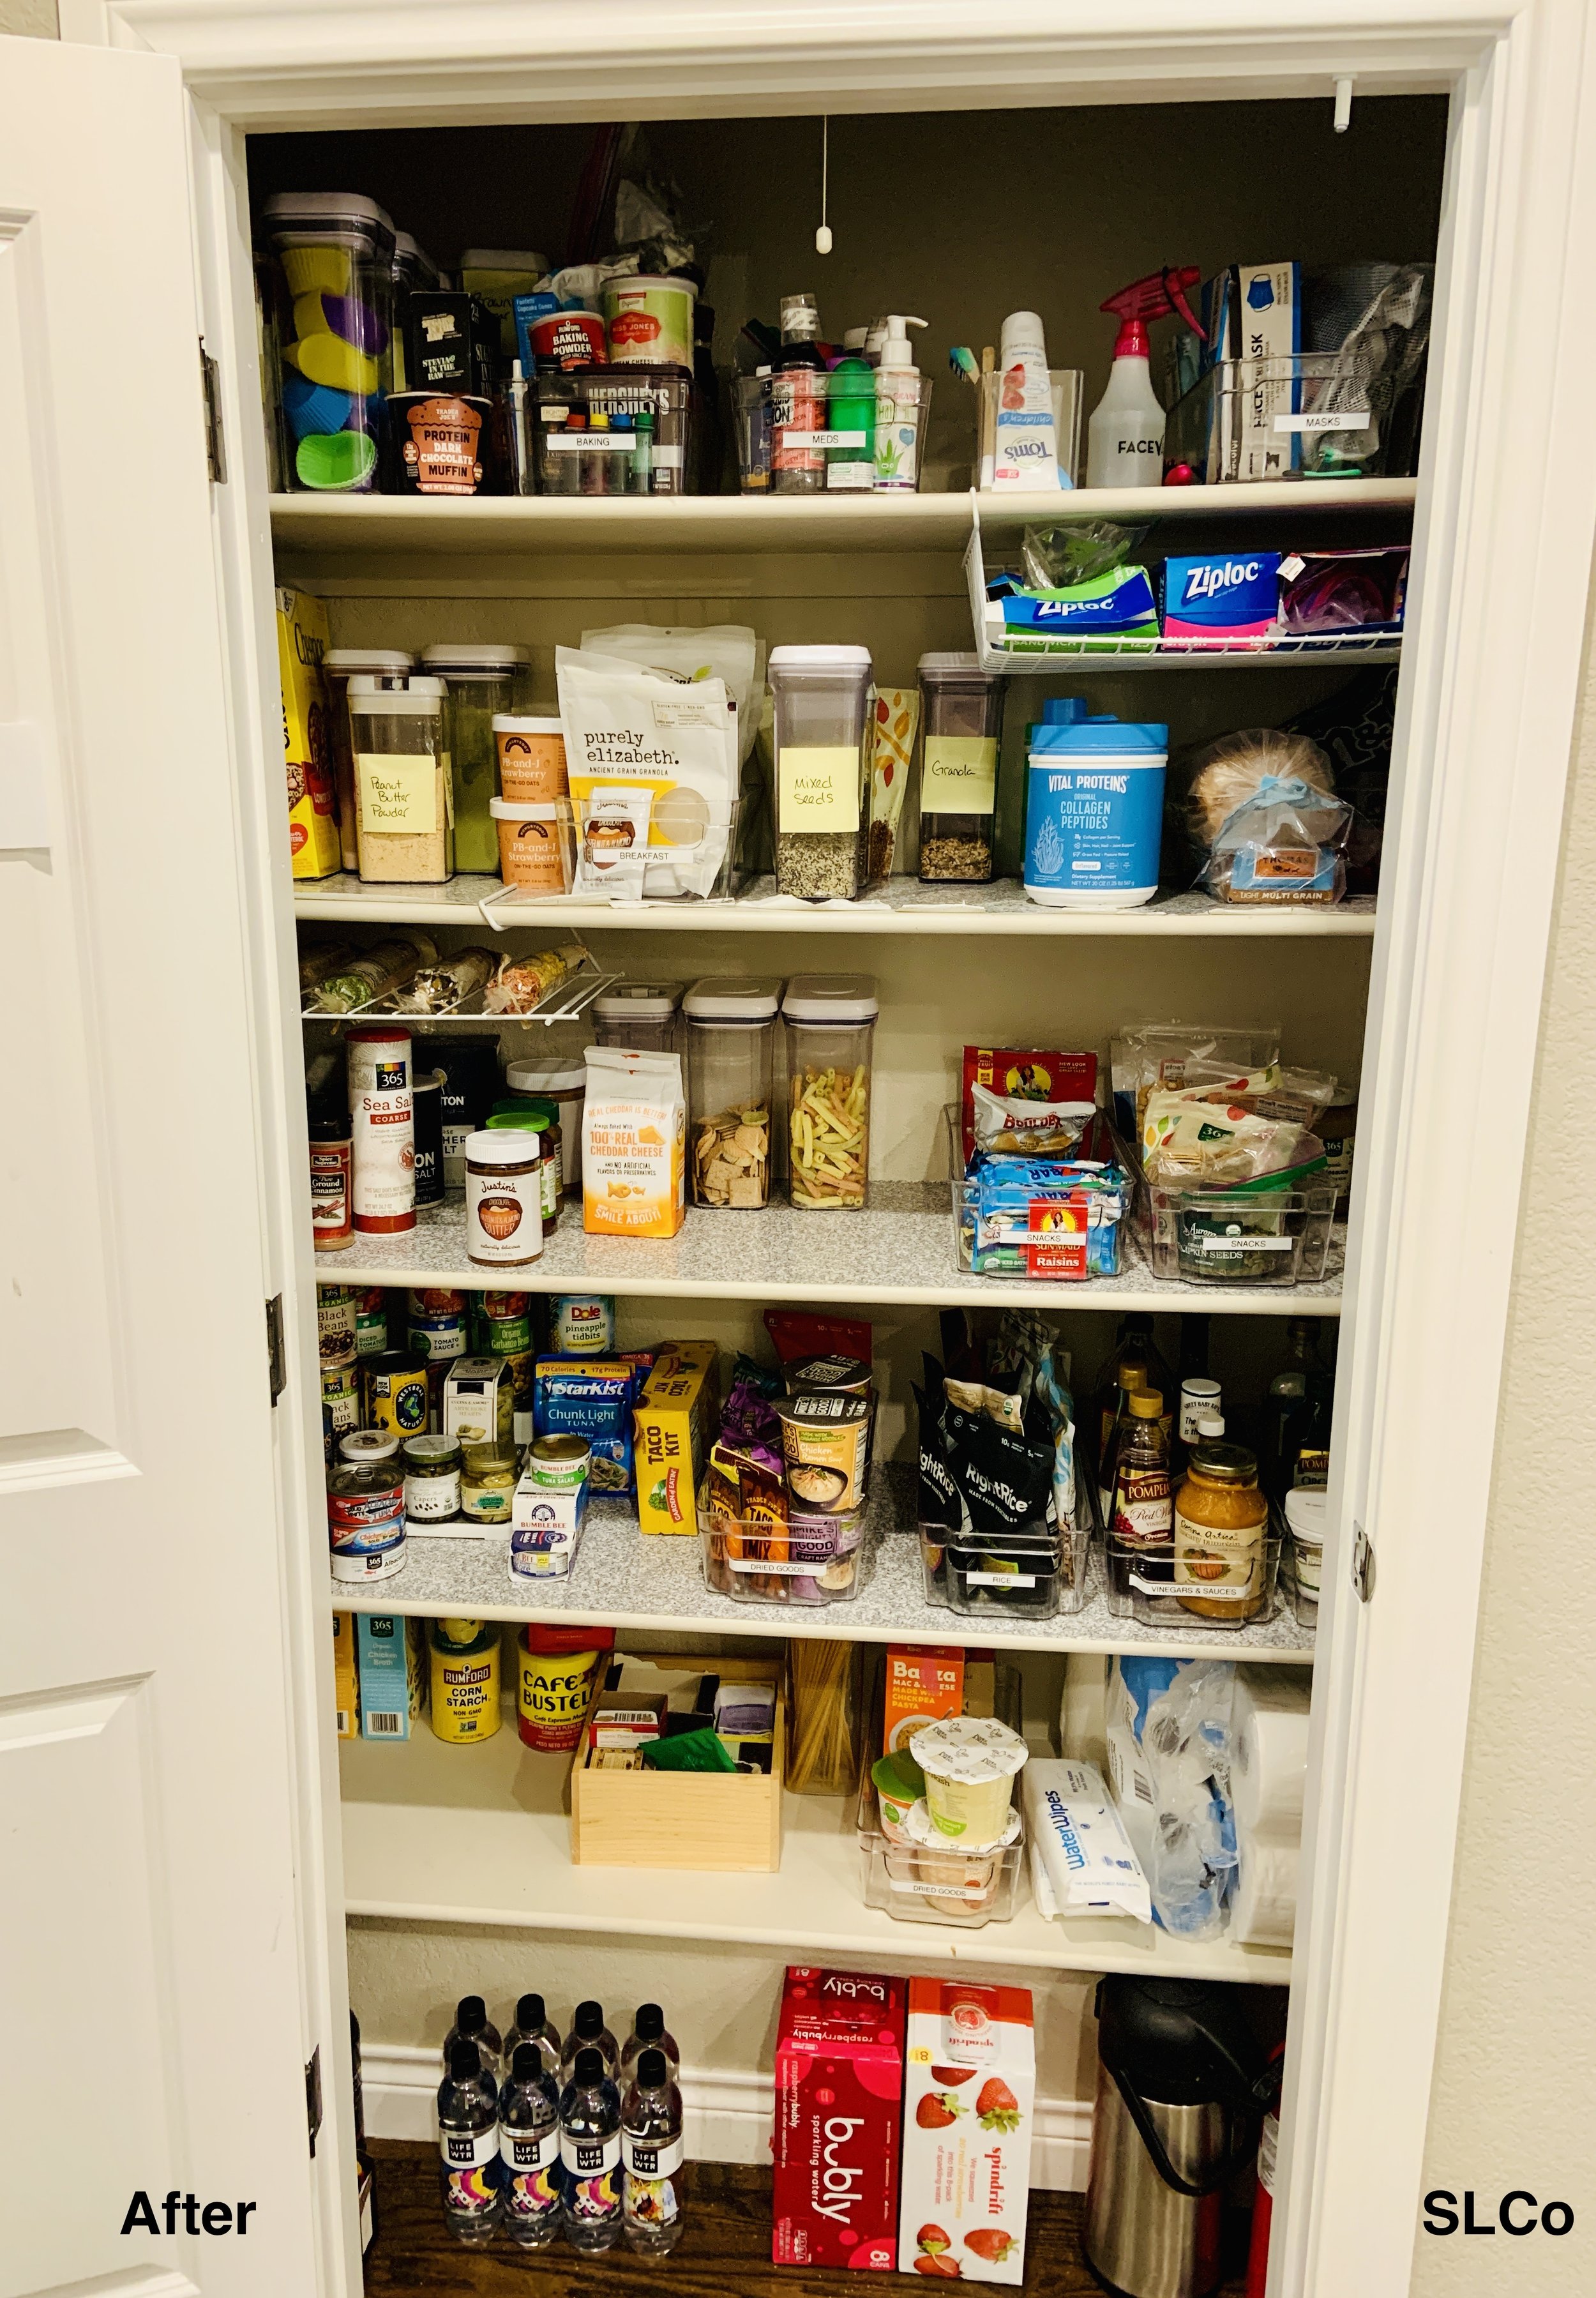 After photo of large pantry with kitchen food items organized in containers.